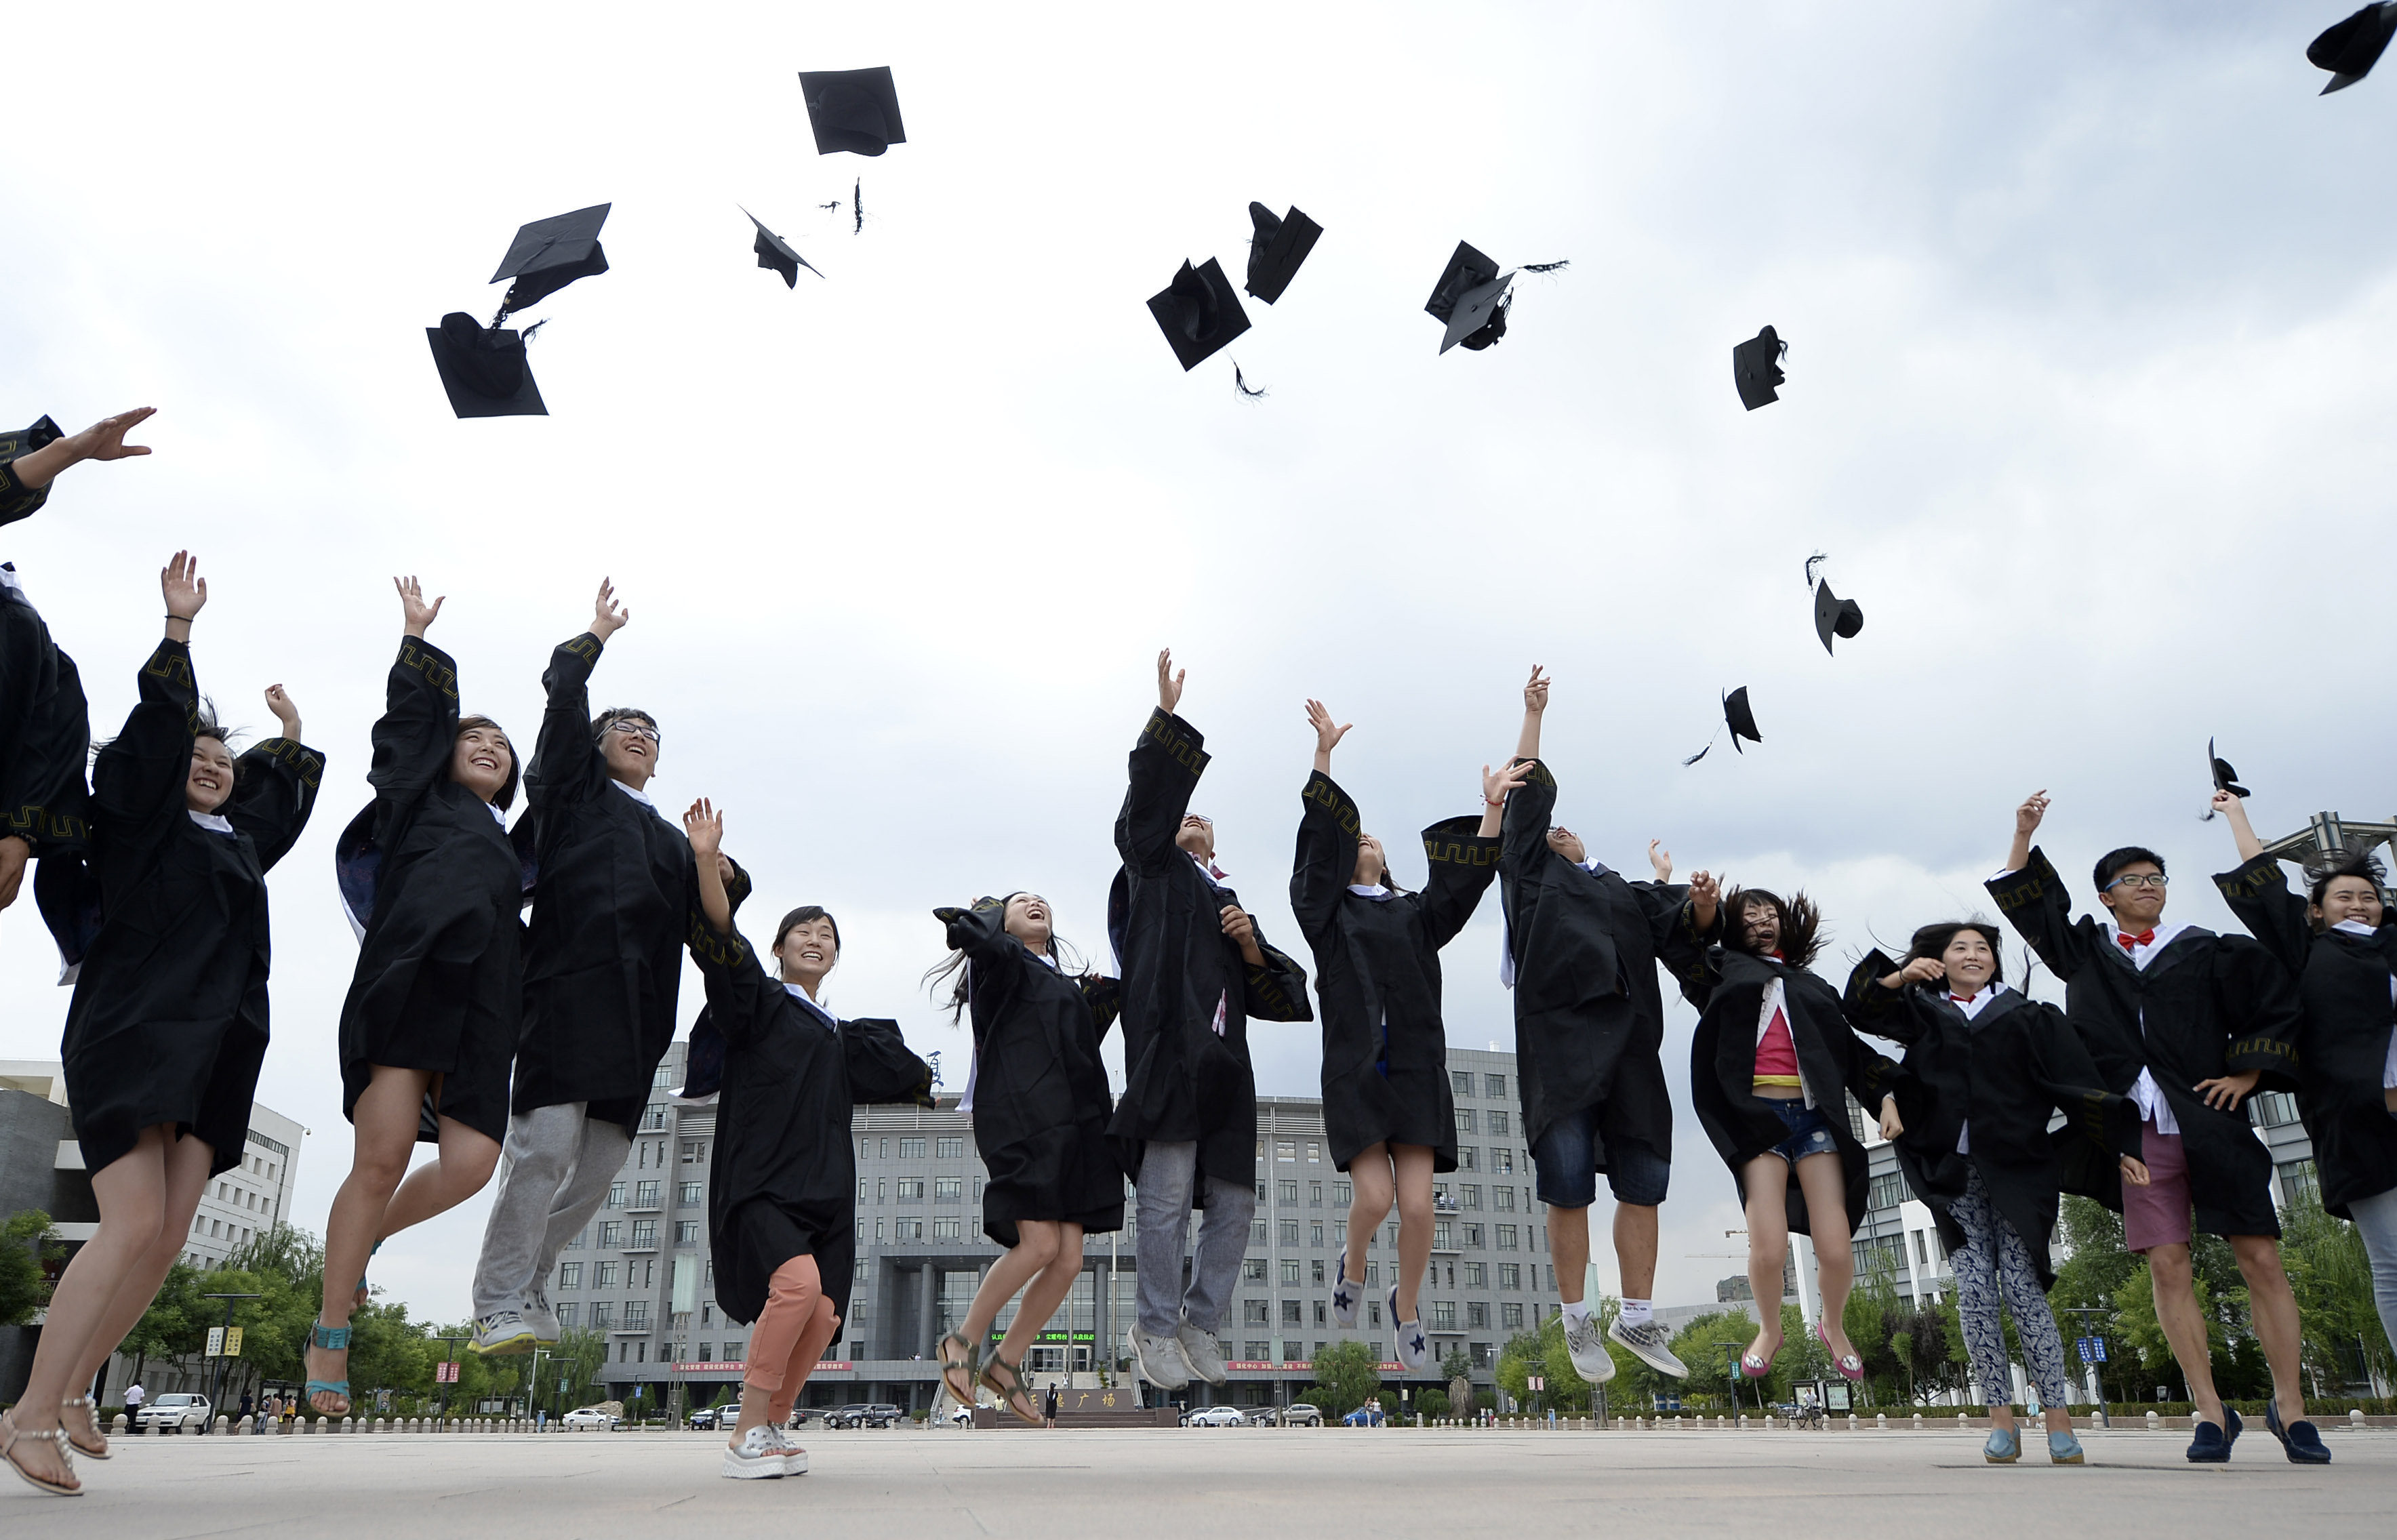 China's computing graduates have reason to jump for joy as study reveals those who go into computing jobs are the highest-paid among all professions. Photo: Xinhua